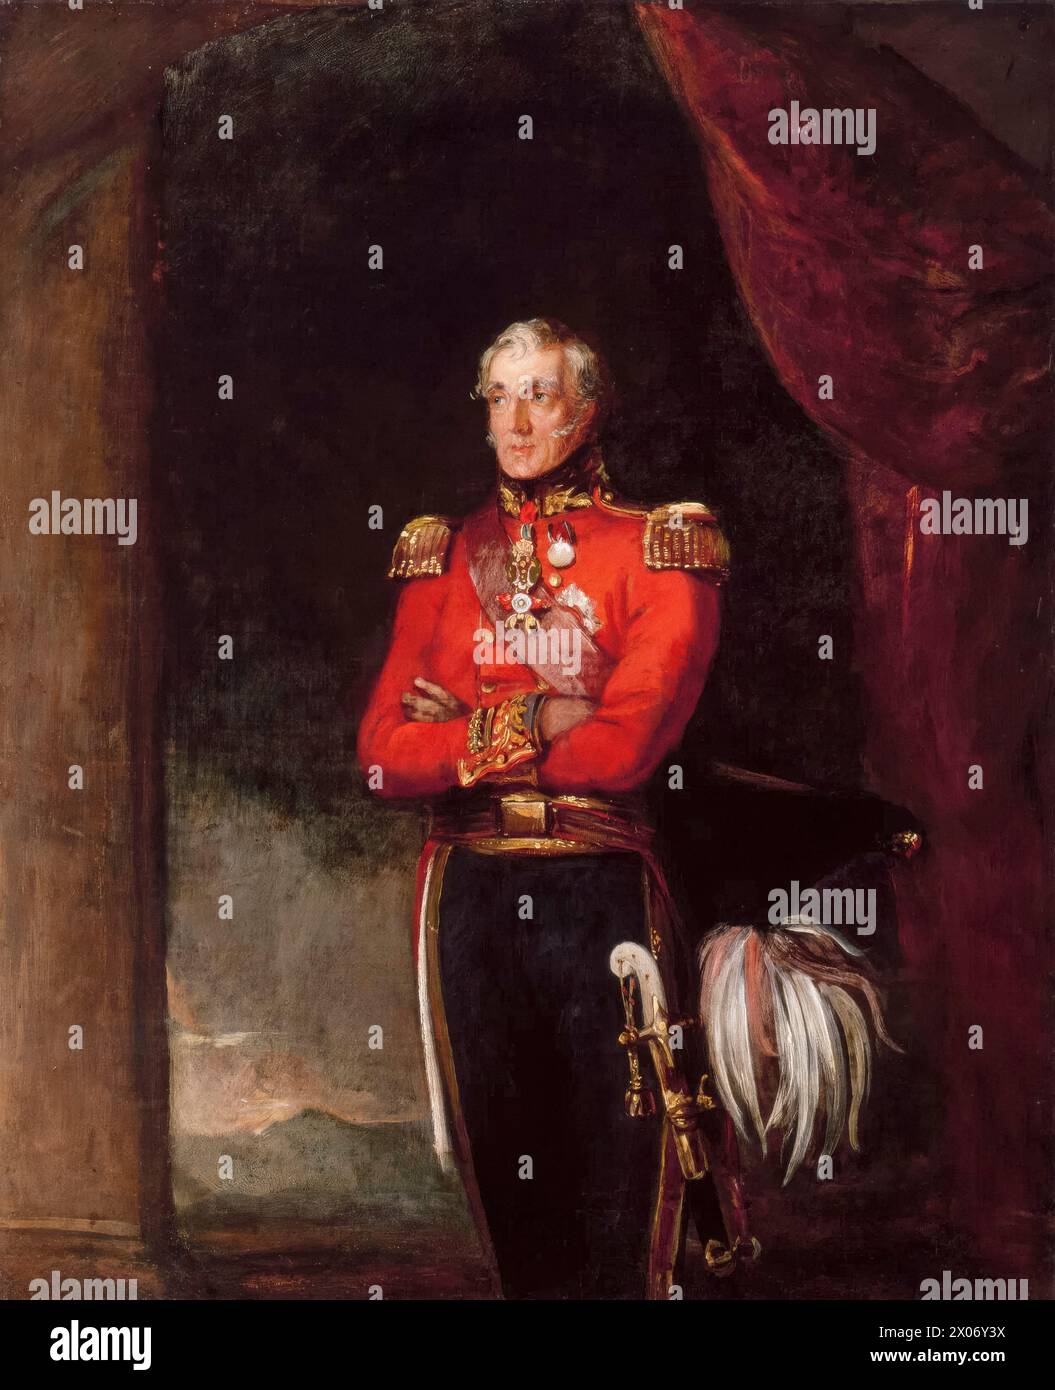 Arthur Wellesley, 1st Duke of Wellington (1769-1852), portrait painting in oil on canvas by William Salter, 1839 Stock Photo